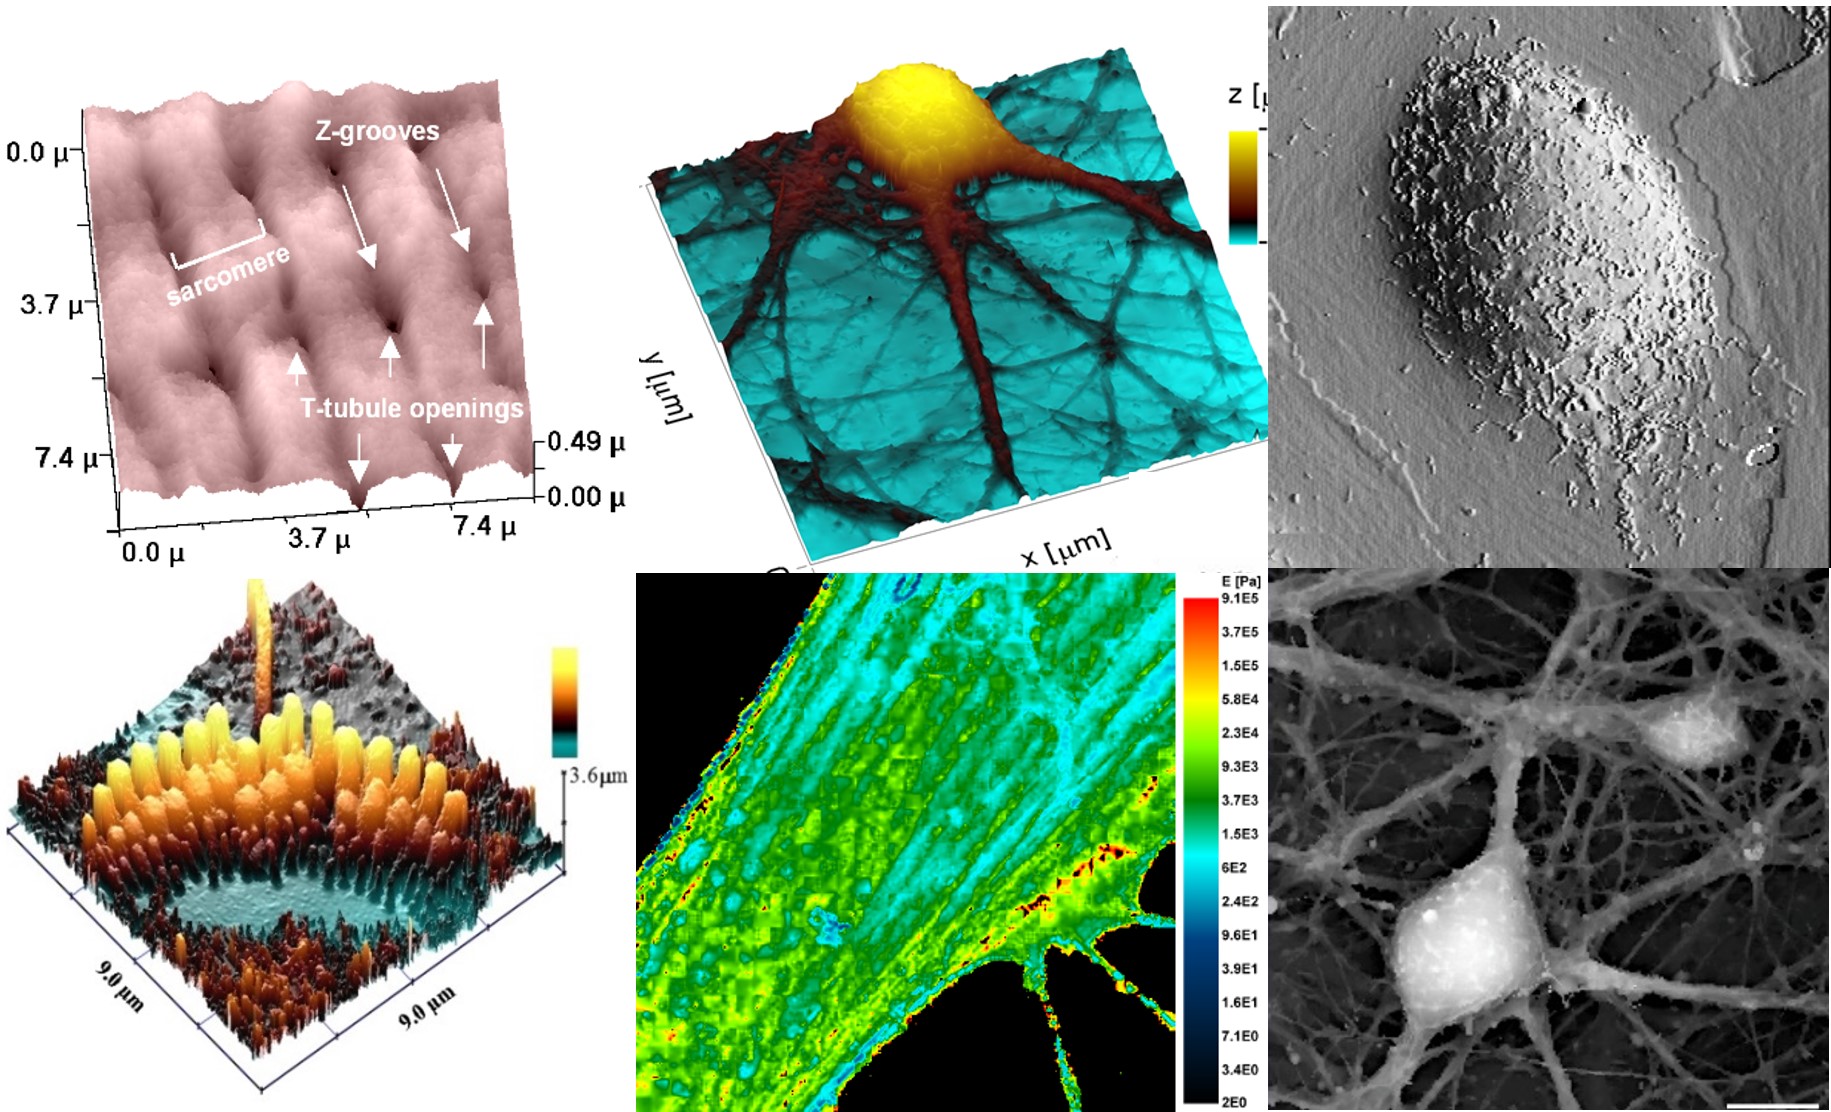 Images examples obtained by Scanning Ion Conductance Microscopy